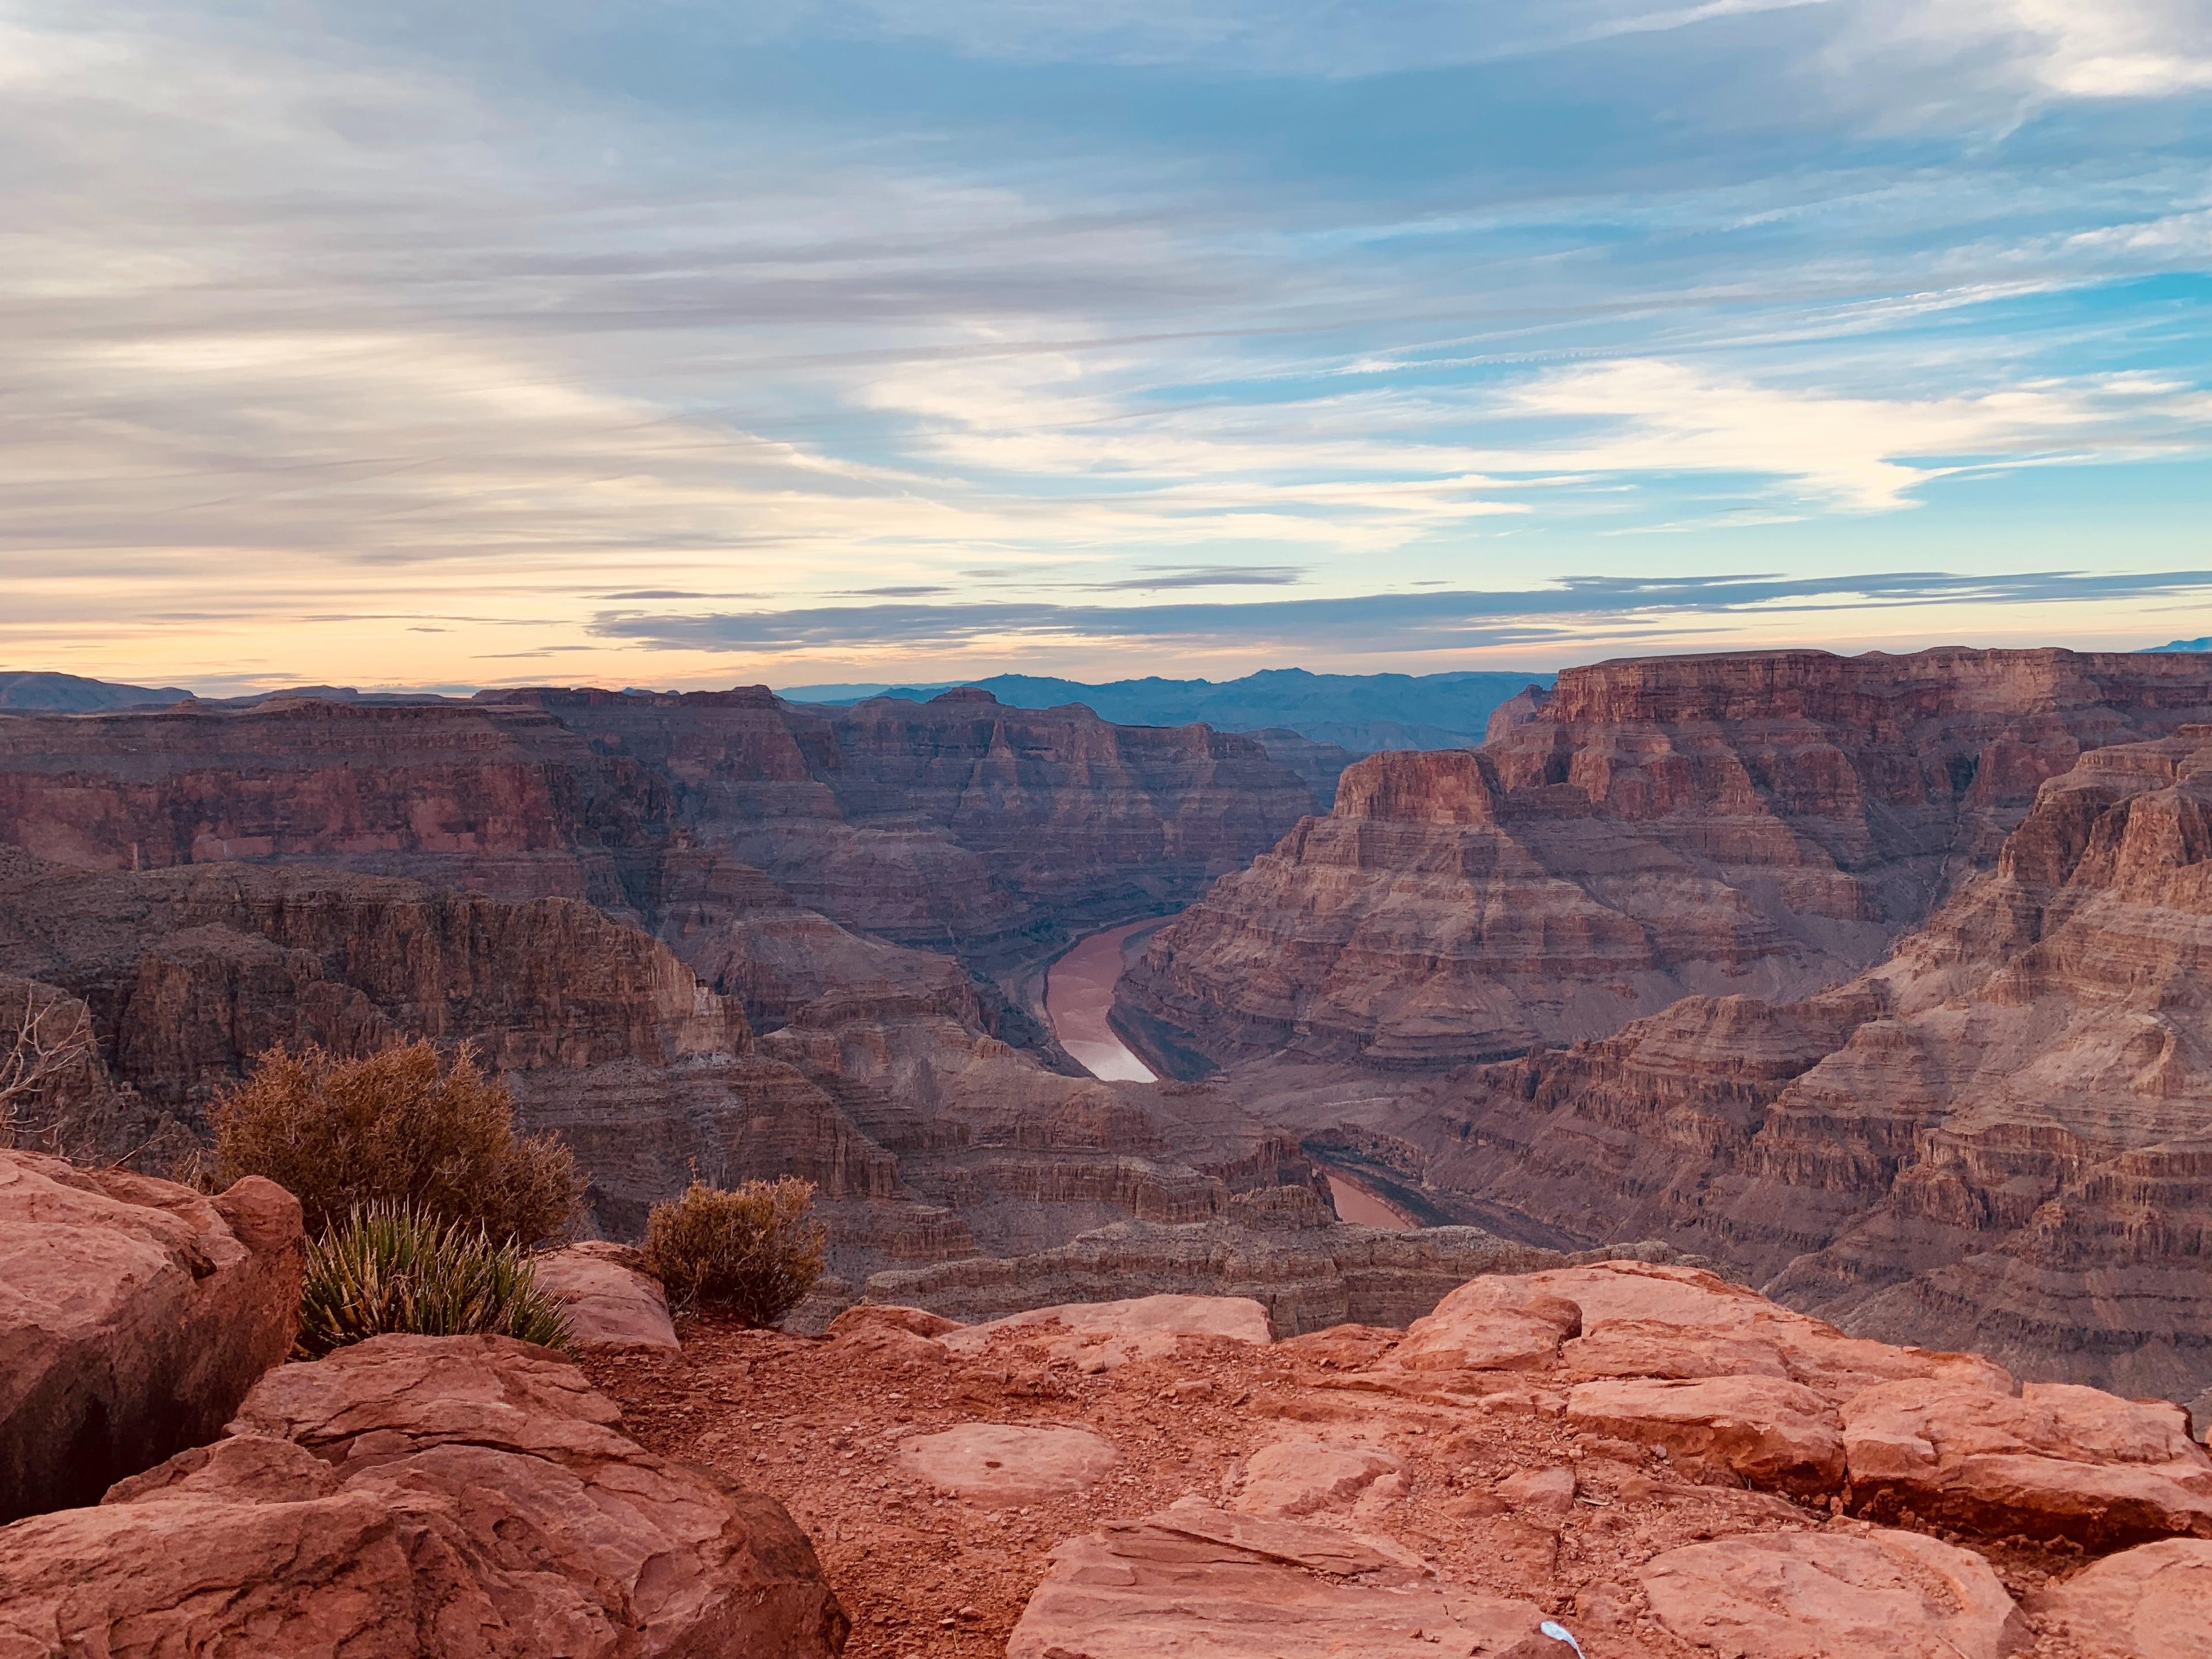 A view of the Grand Canyon under blue cloudy skies.